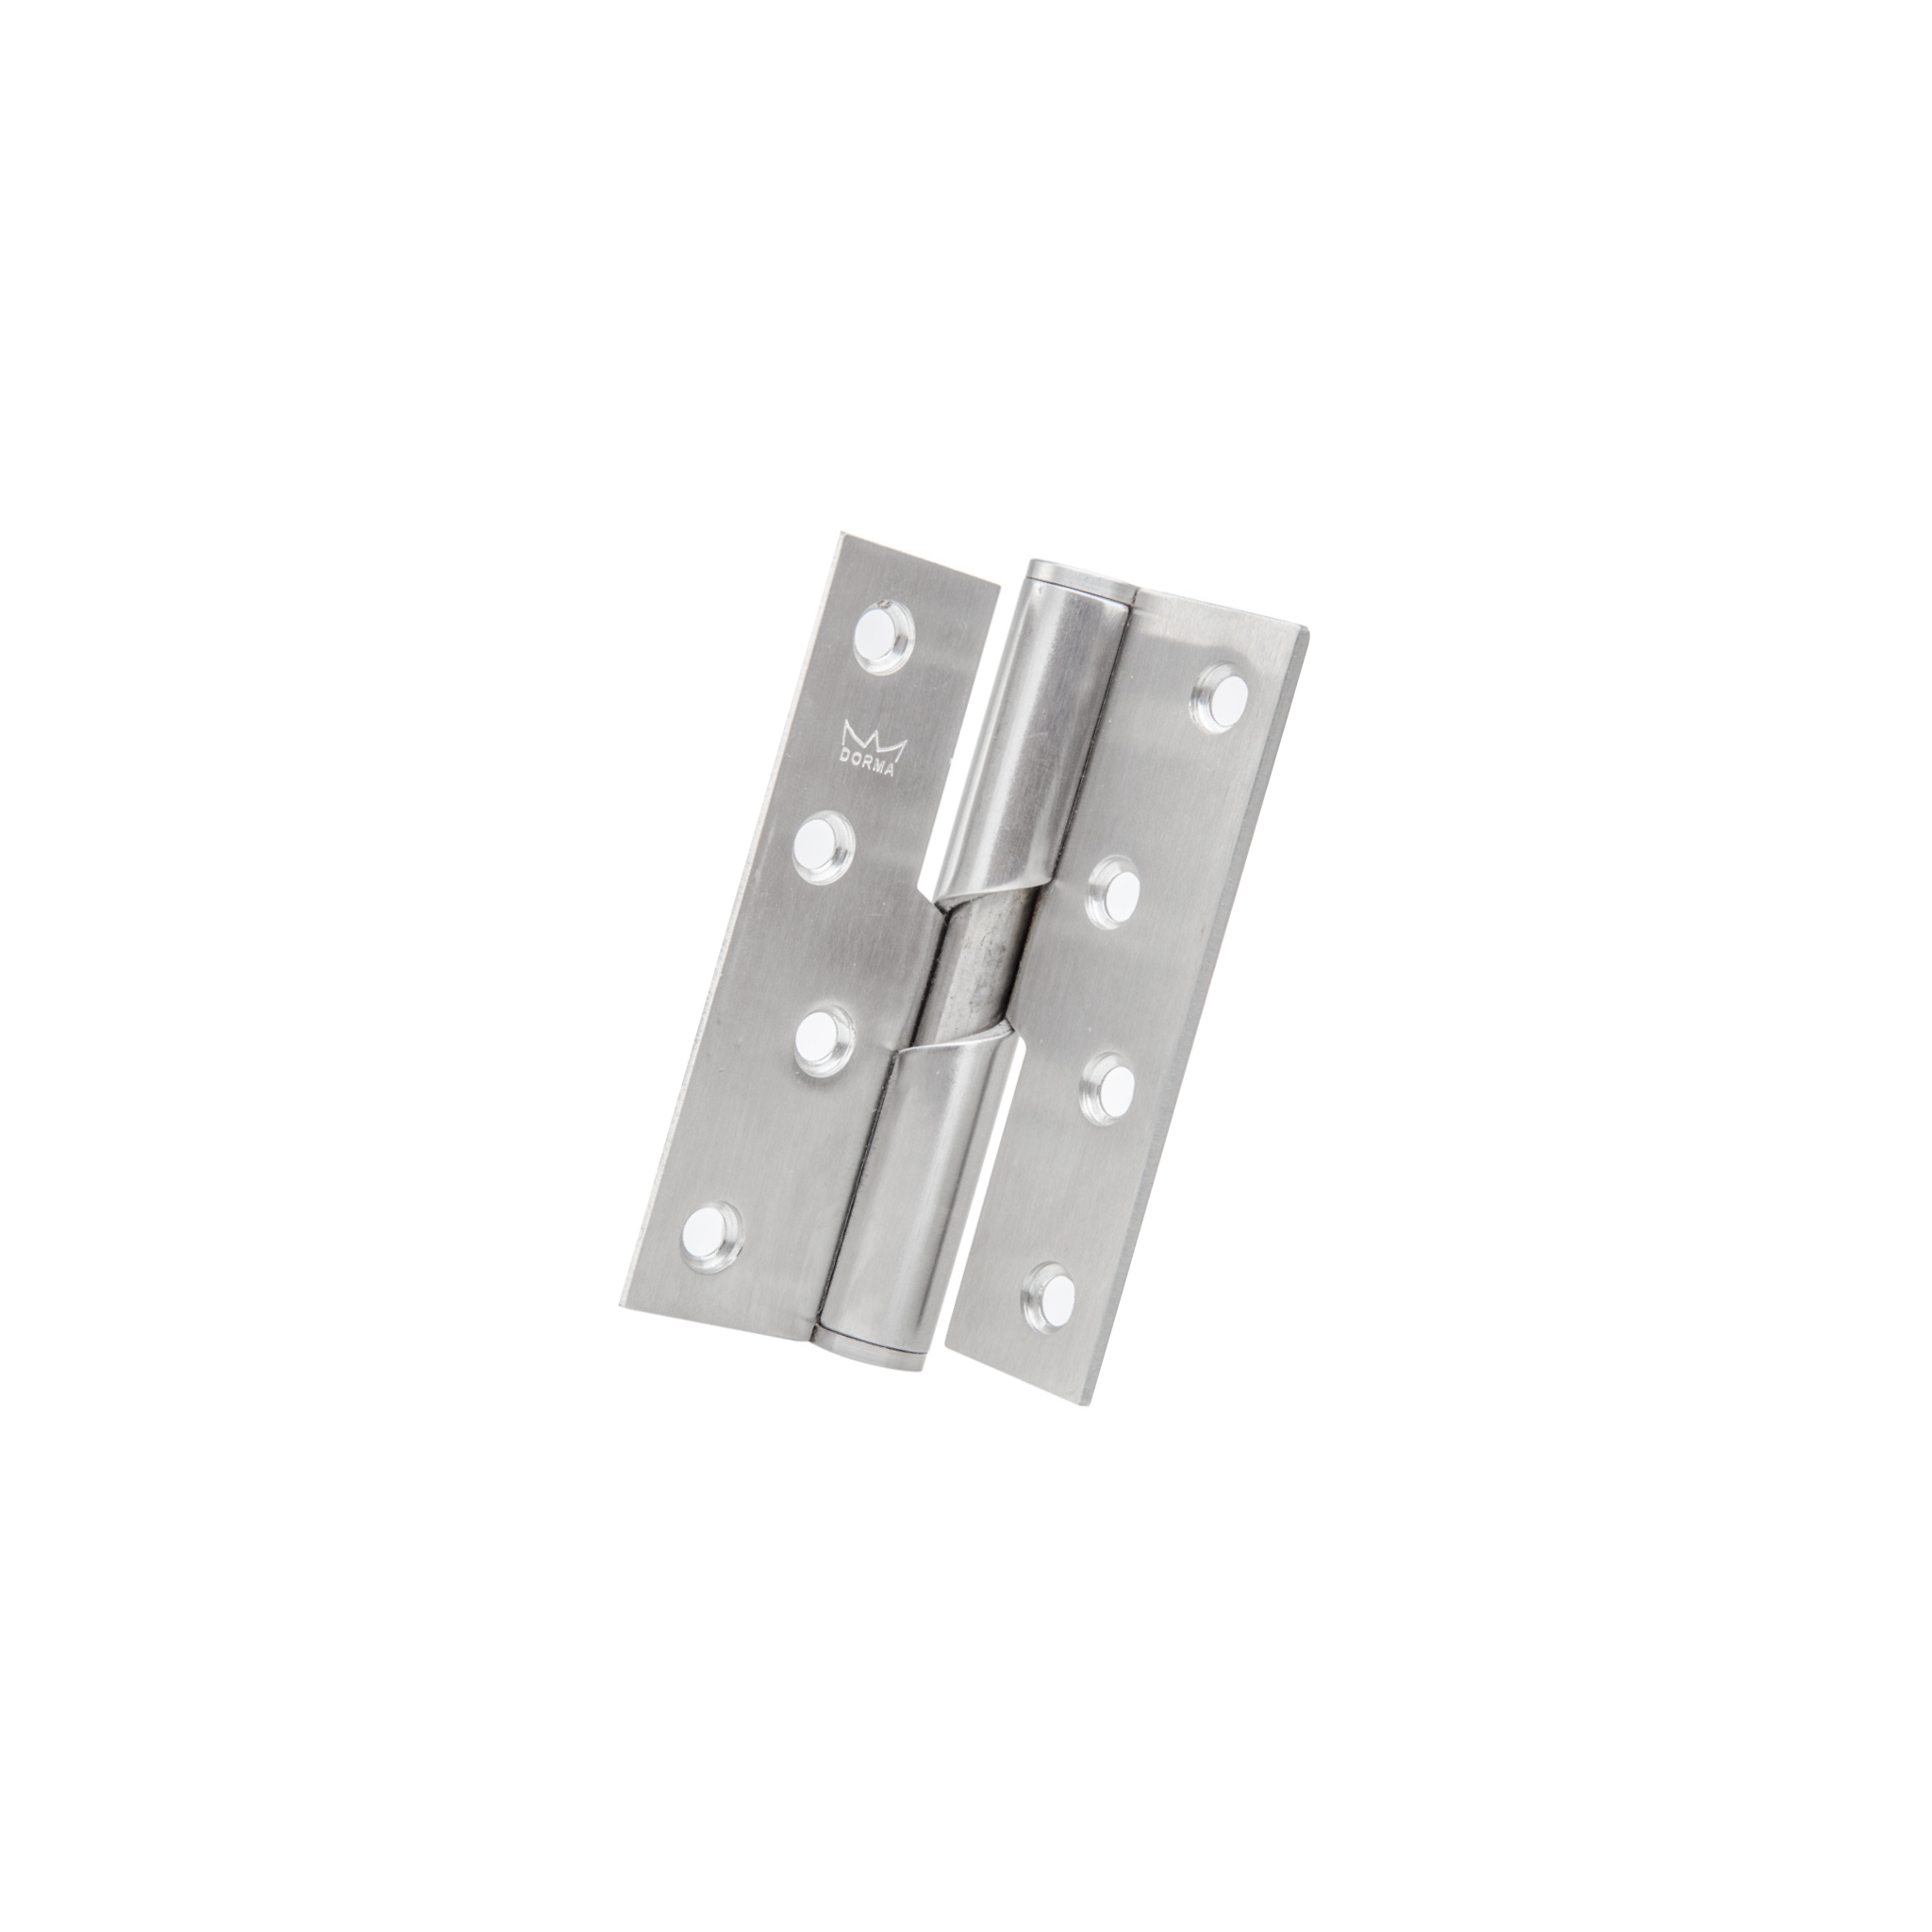 DFL-SS-015 (L) , Falling Butt Hinge, Left Hand, 2 x Hinges (1 Pair), Max Door Weight: 50kg, 102mm (h) x 75mm (w) x 3mm (t), Stainless Steel, DORMAKABA